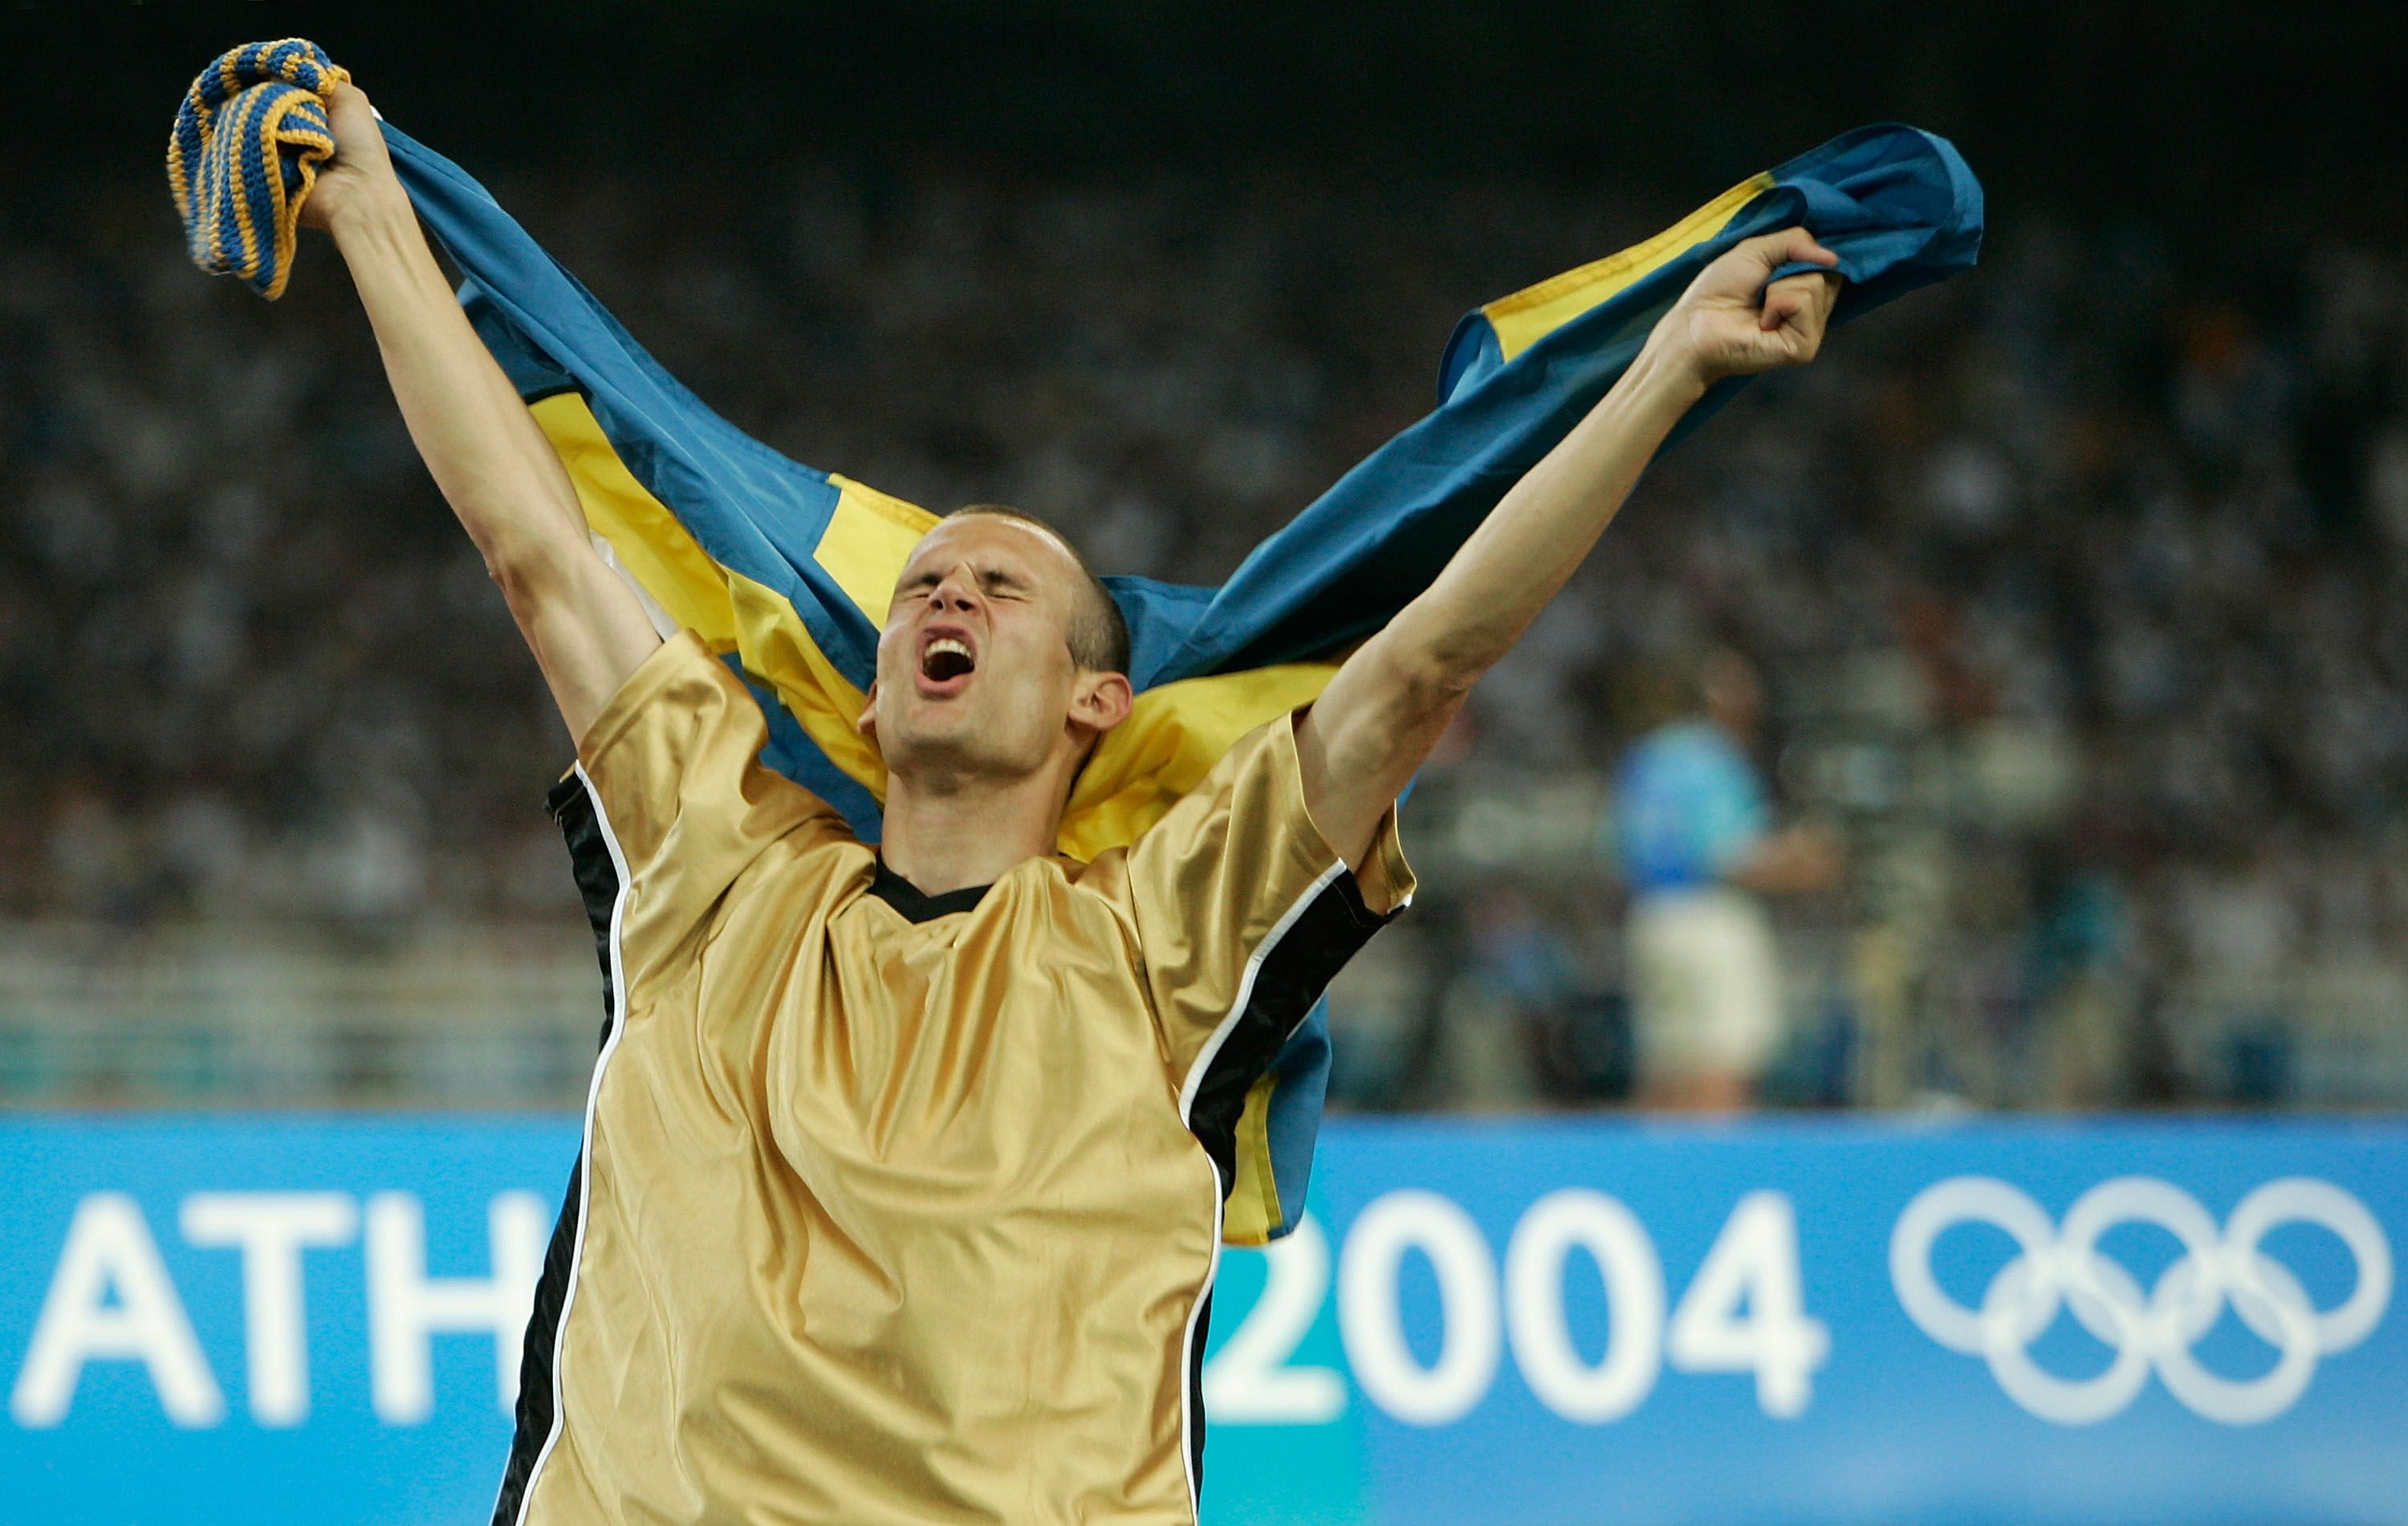 Stefan Holm celebrates his Olympic title win in Athens in 2004